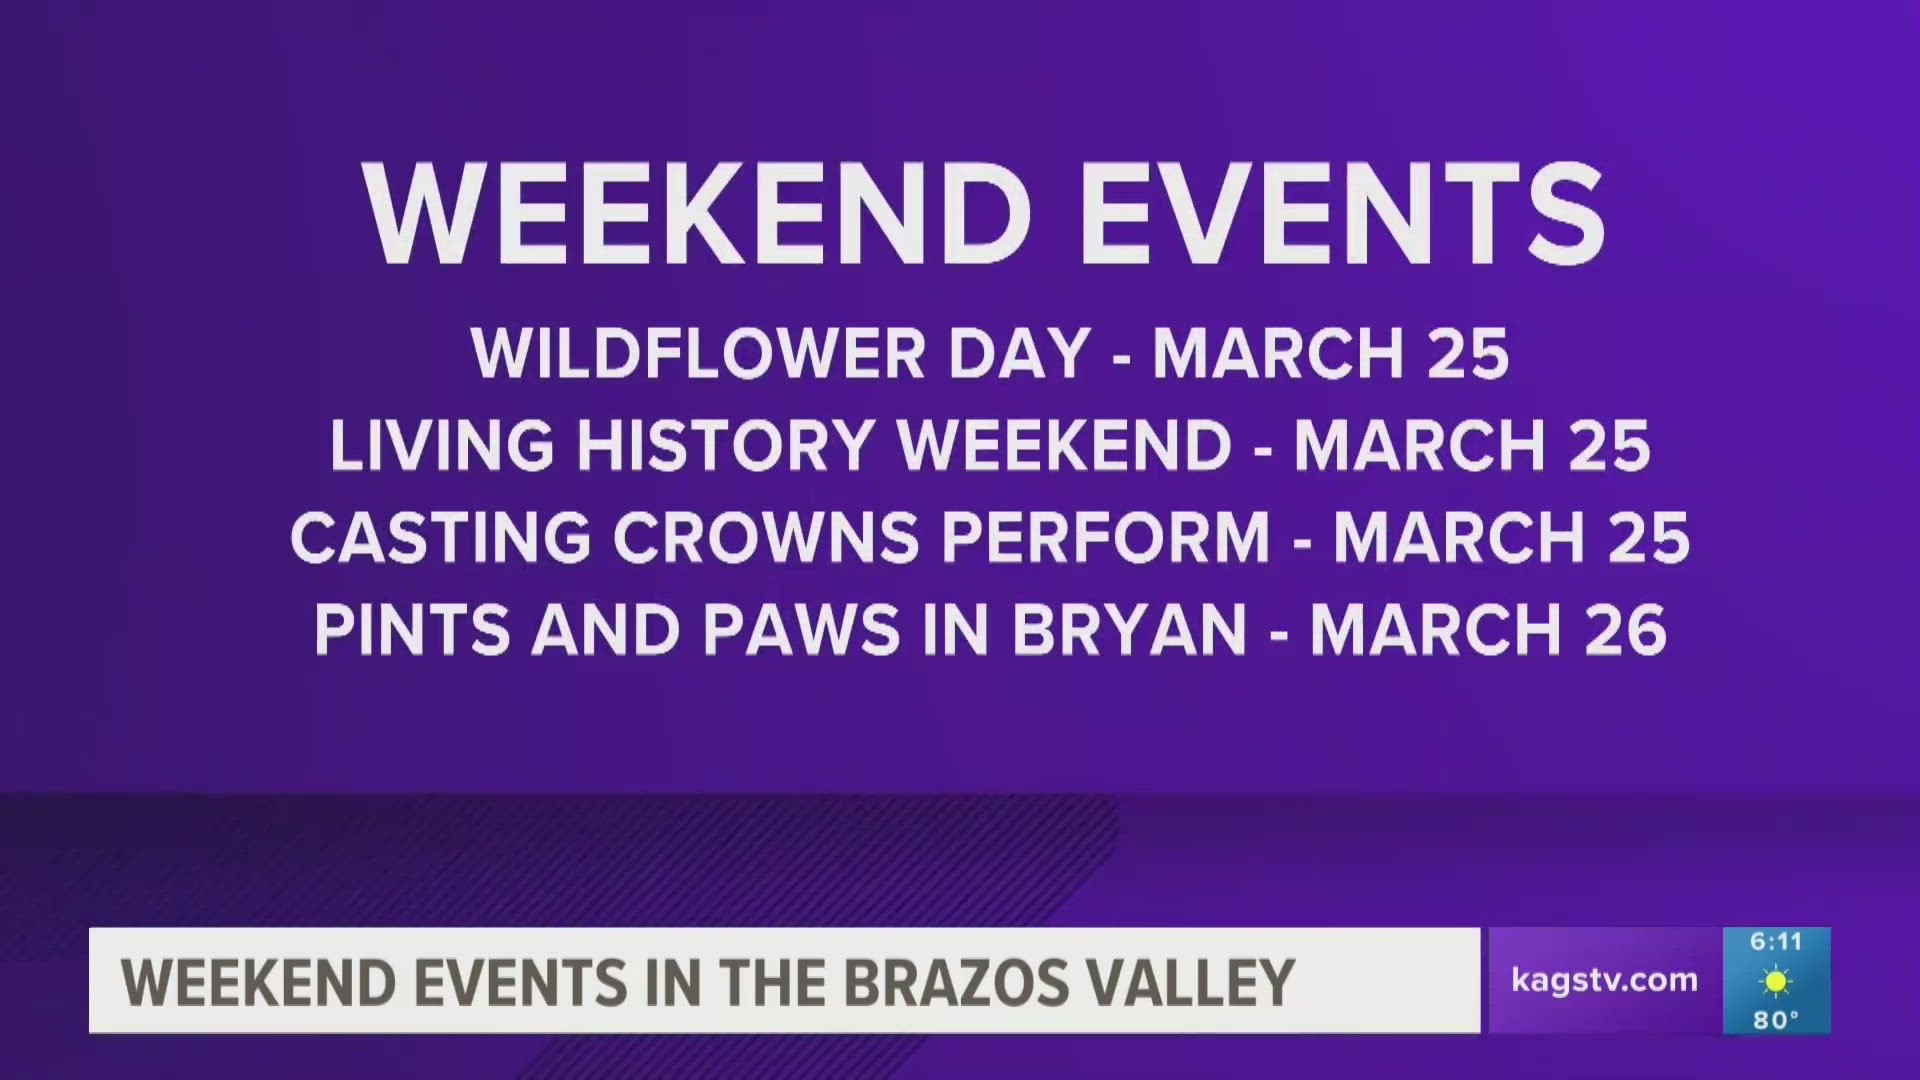 Here are some of KAGS's weekend picks for around the Bryan-College Station area.